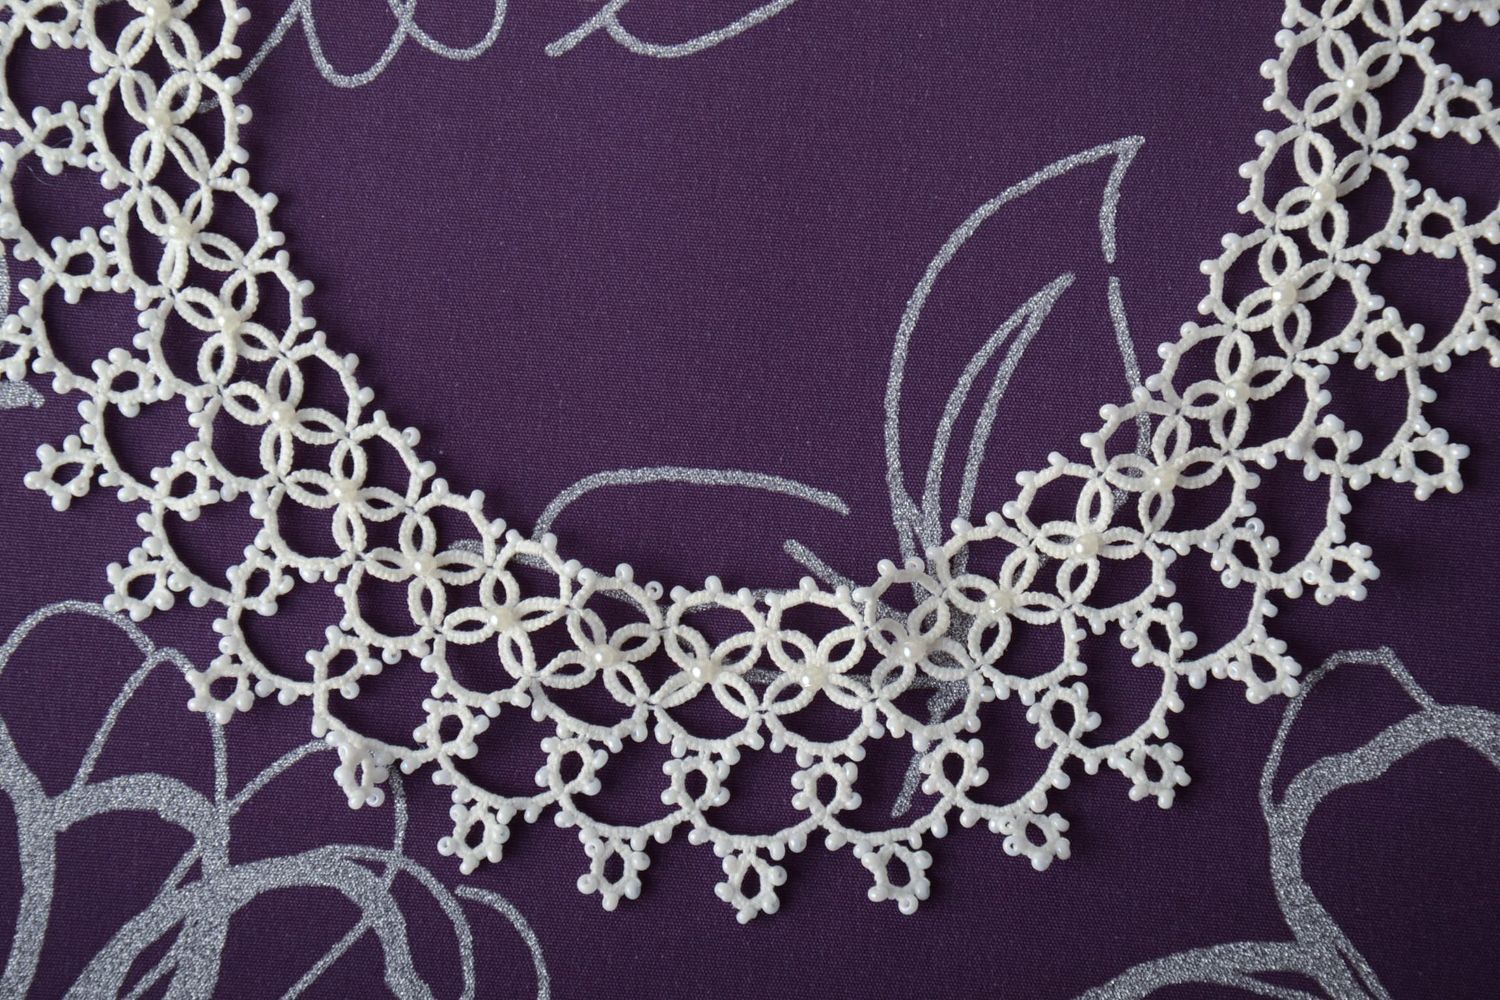 Woven necklace with beads made using tatting technique photo 1